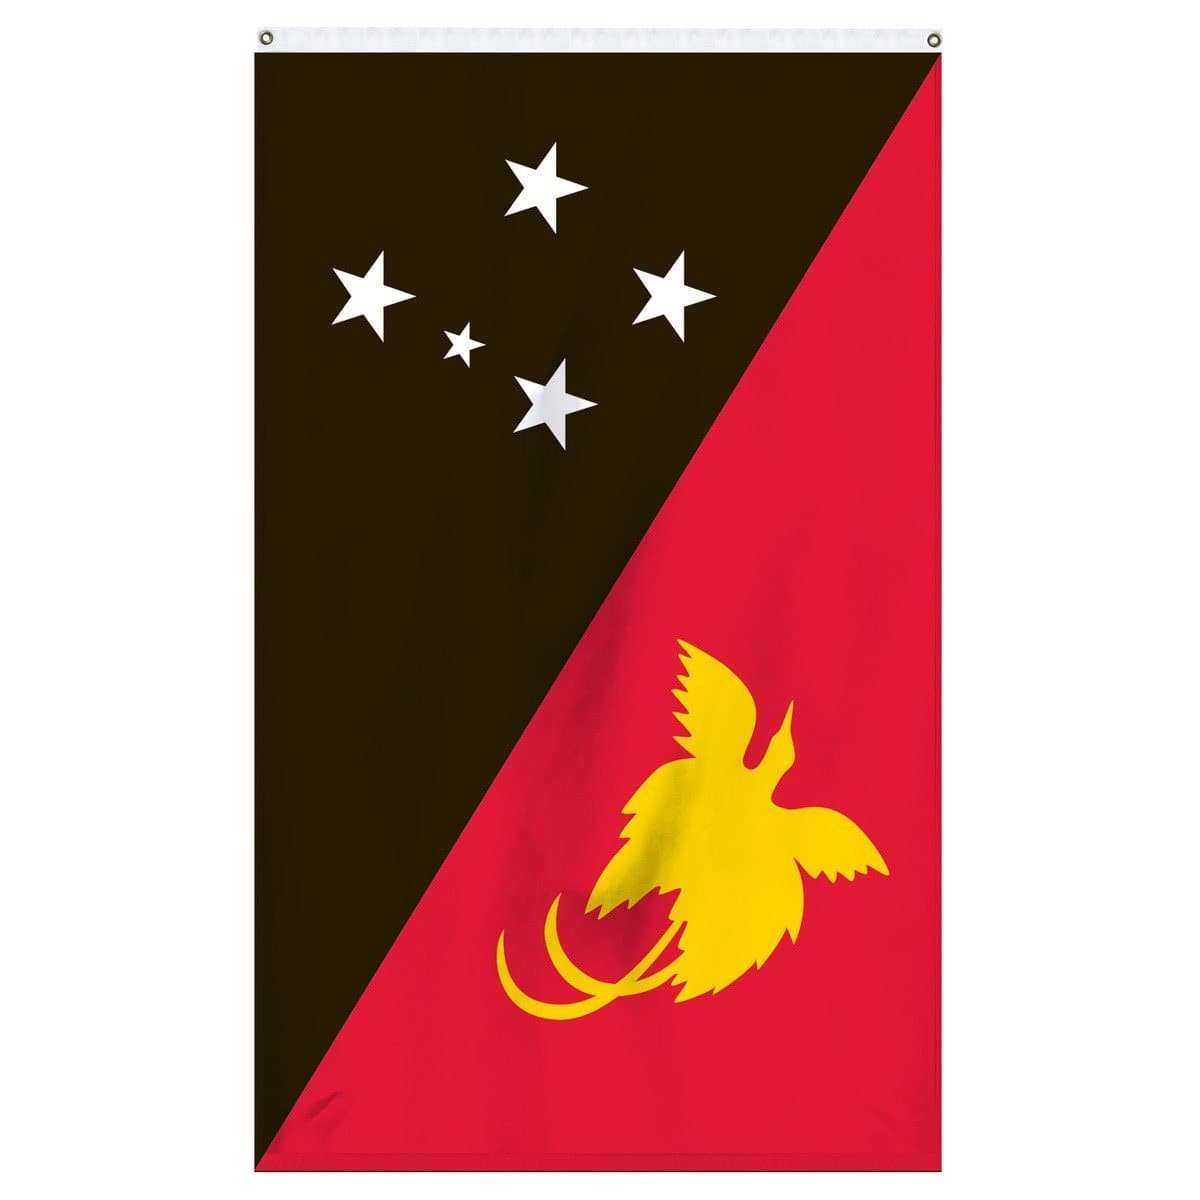 Papua New Guinea National flag for sale to buy online now